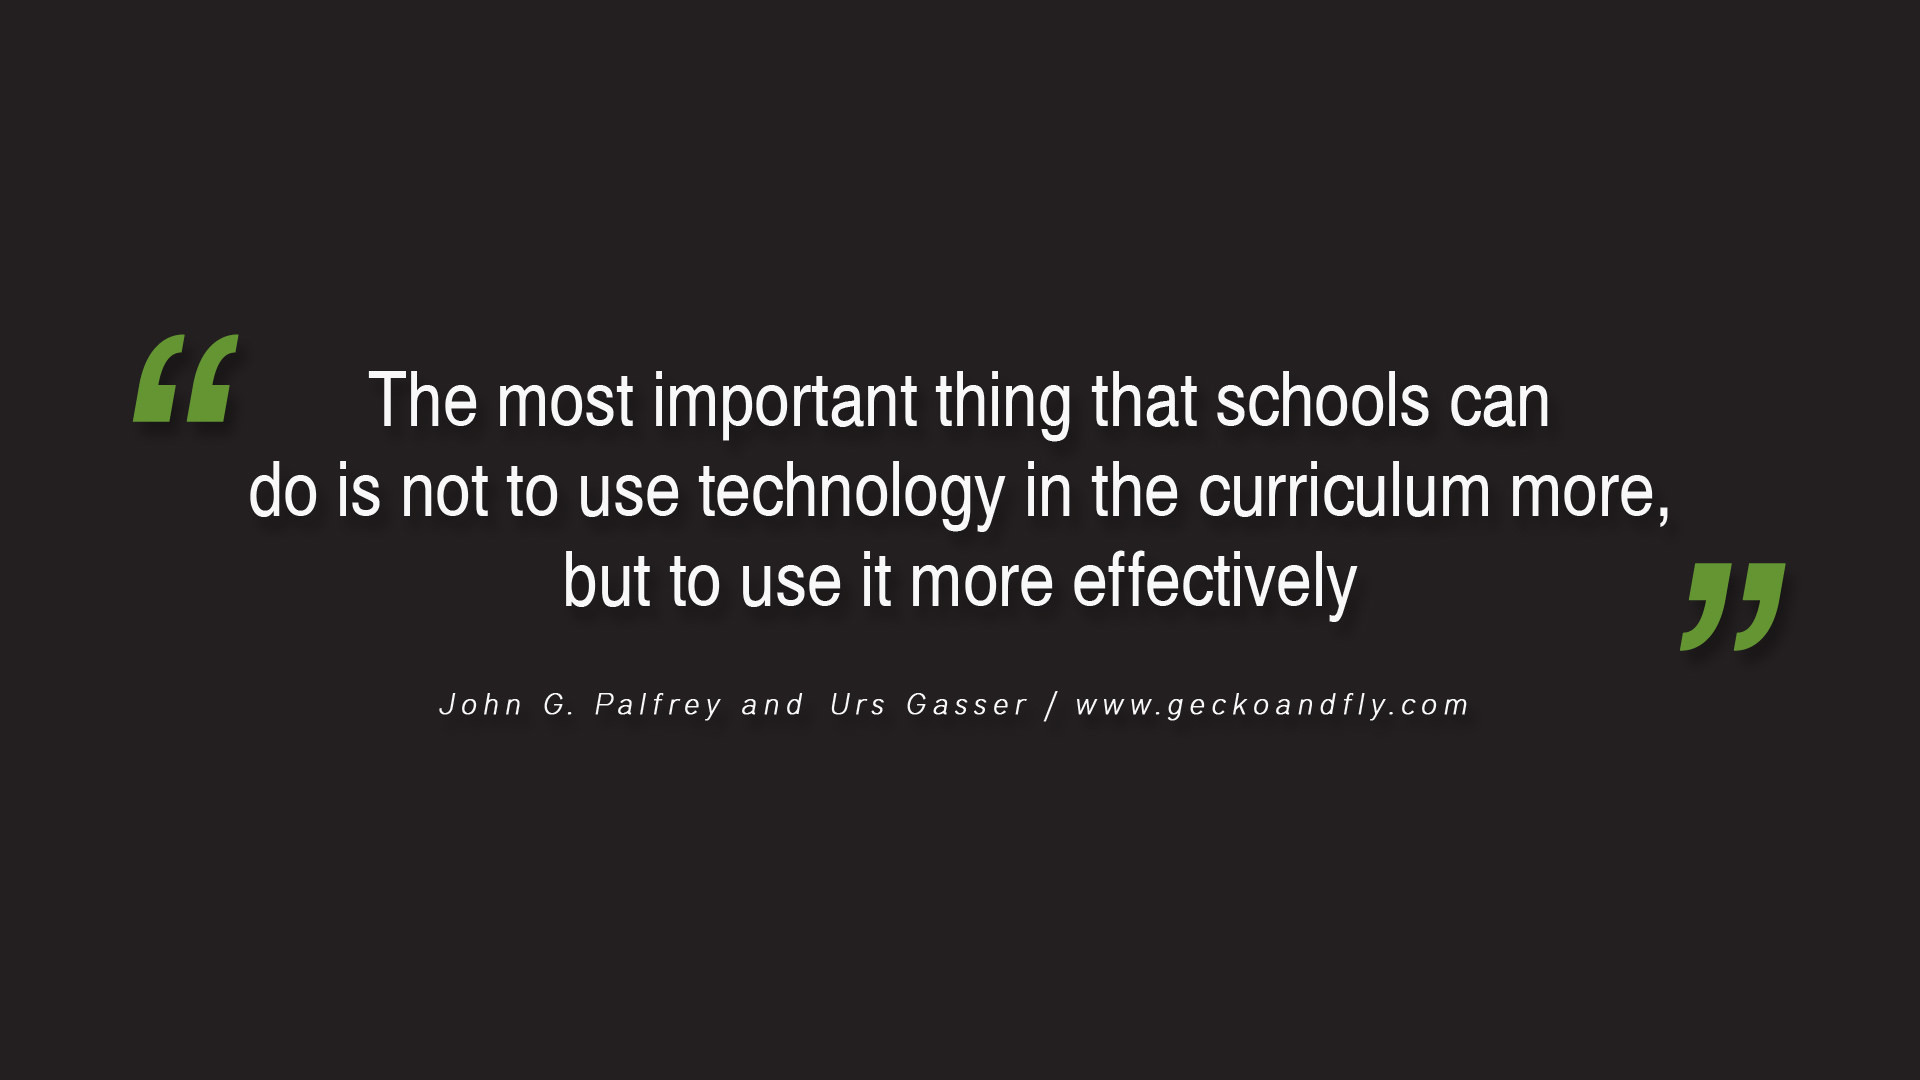 Quotes About Technology And Education
 Quotes About Technology In Education QuotesGram